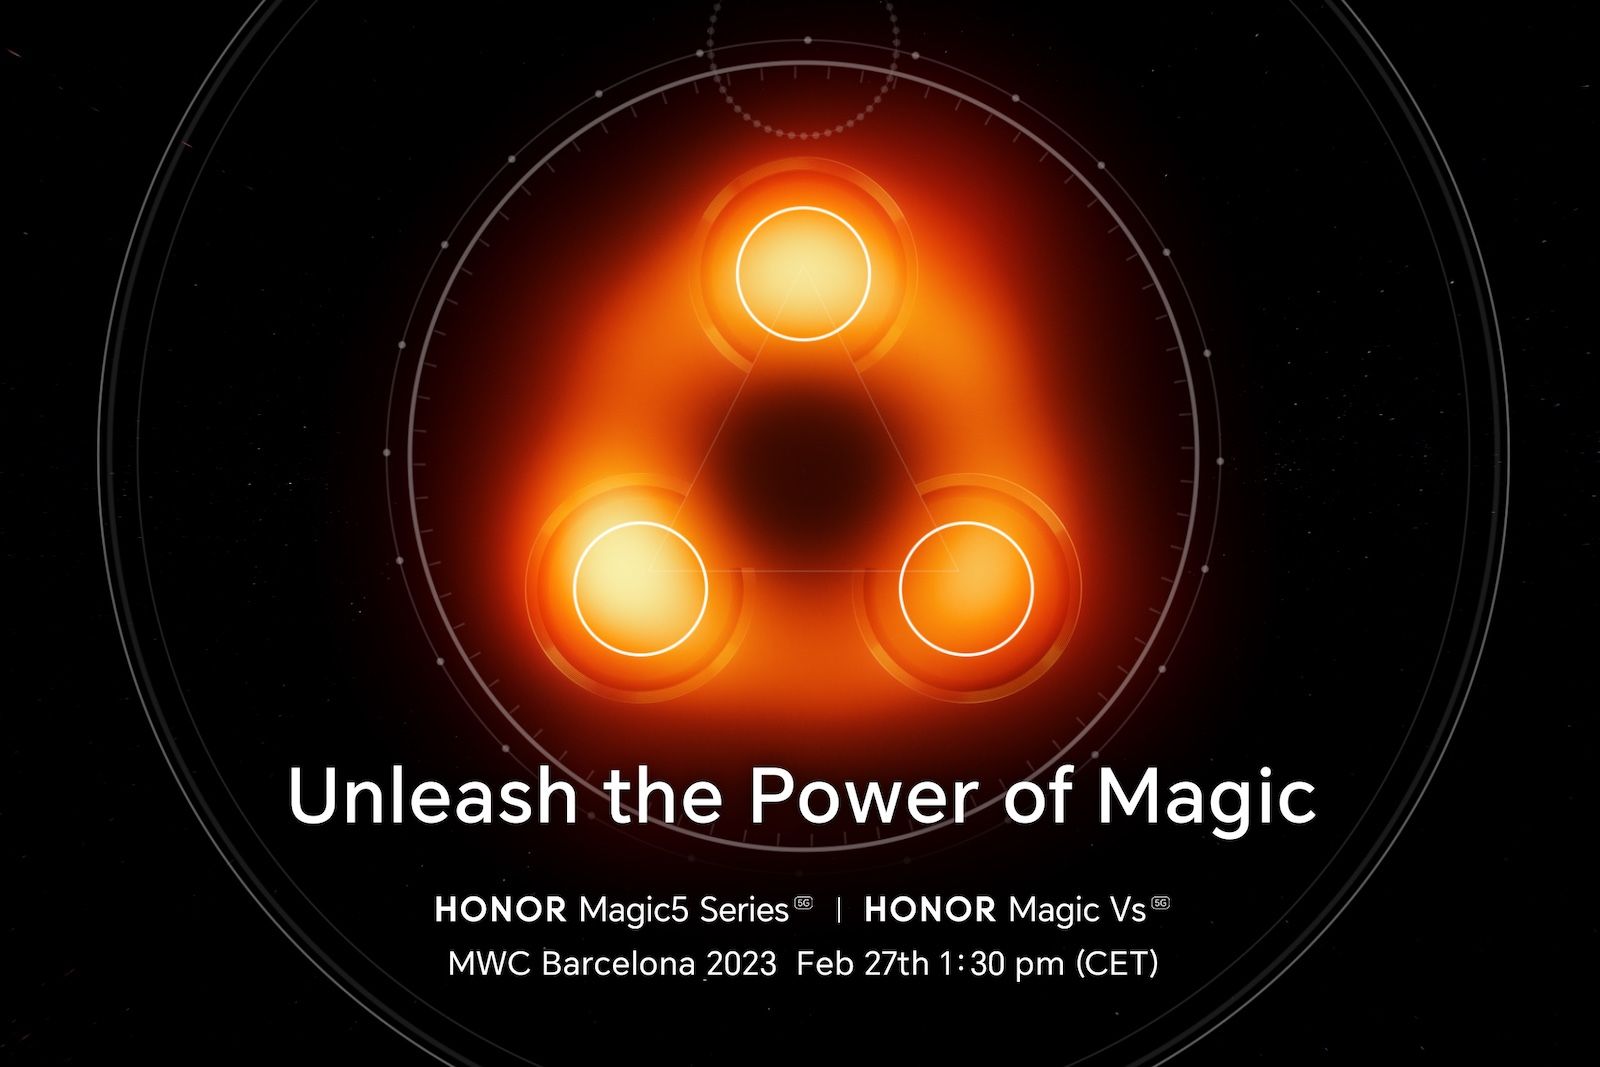 Honor confirms MWC 2023 event to unveil Magic5 Series and launch Magic